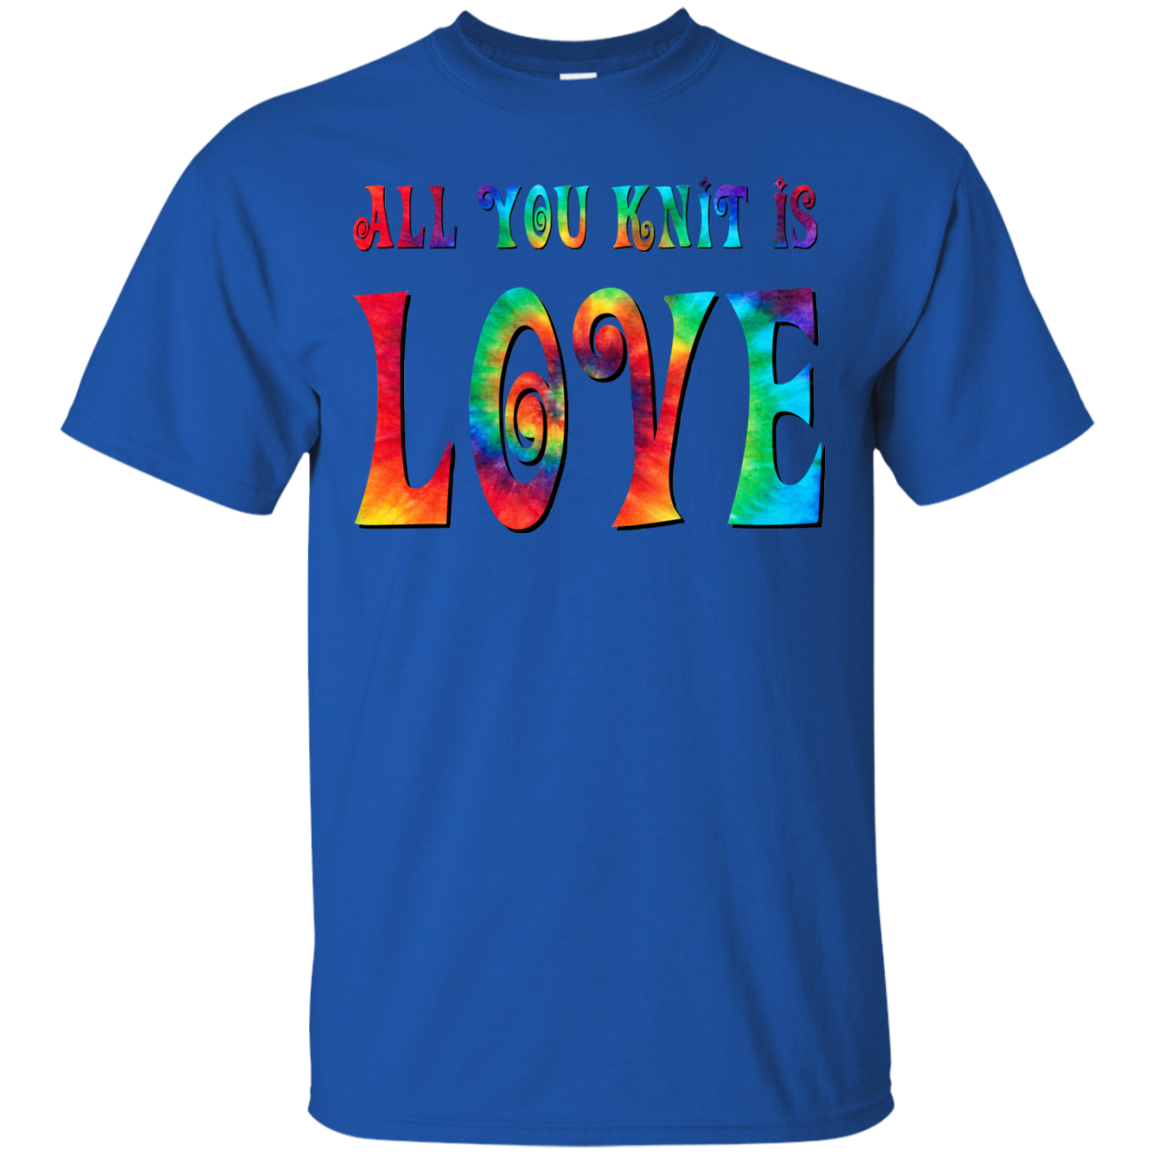 All You Knit is Love Ultra Cotton T-Shirt